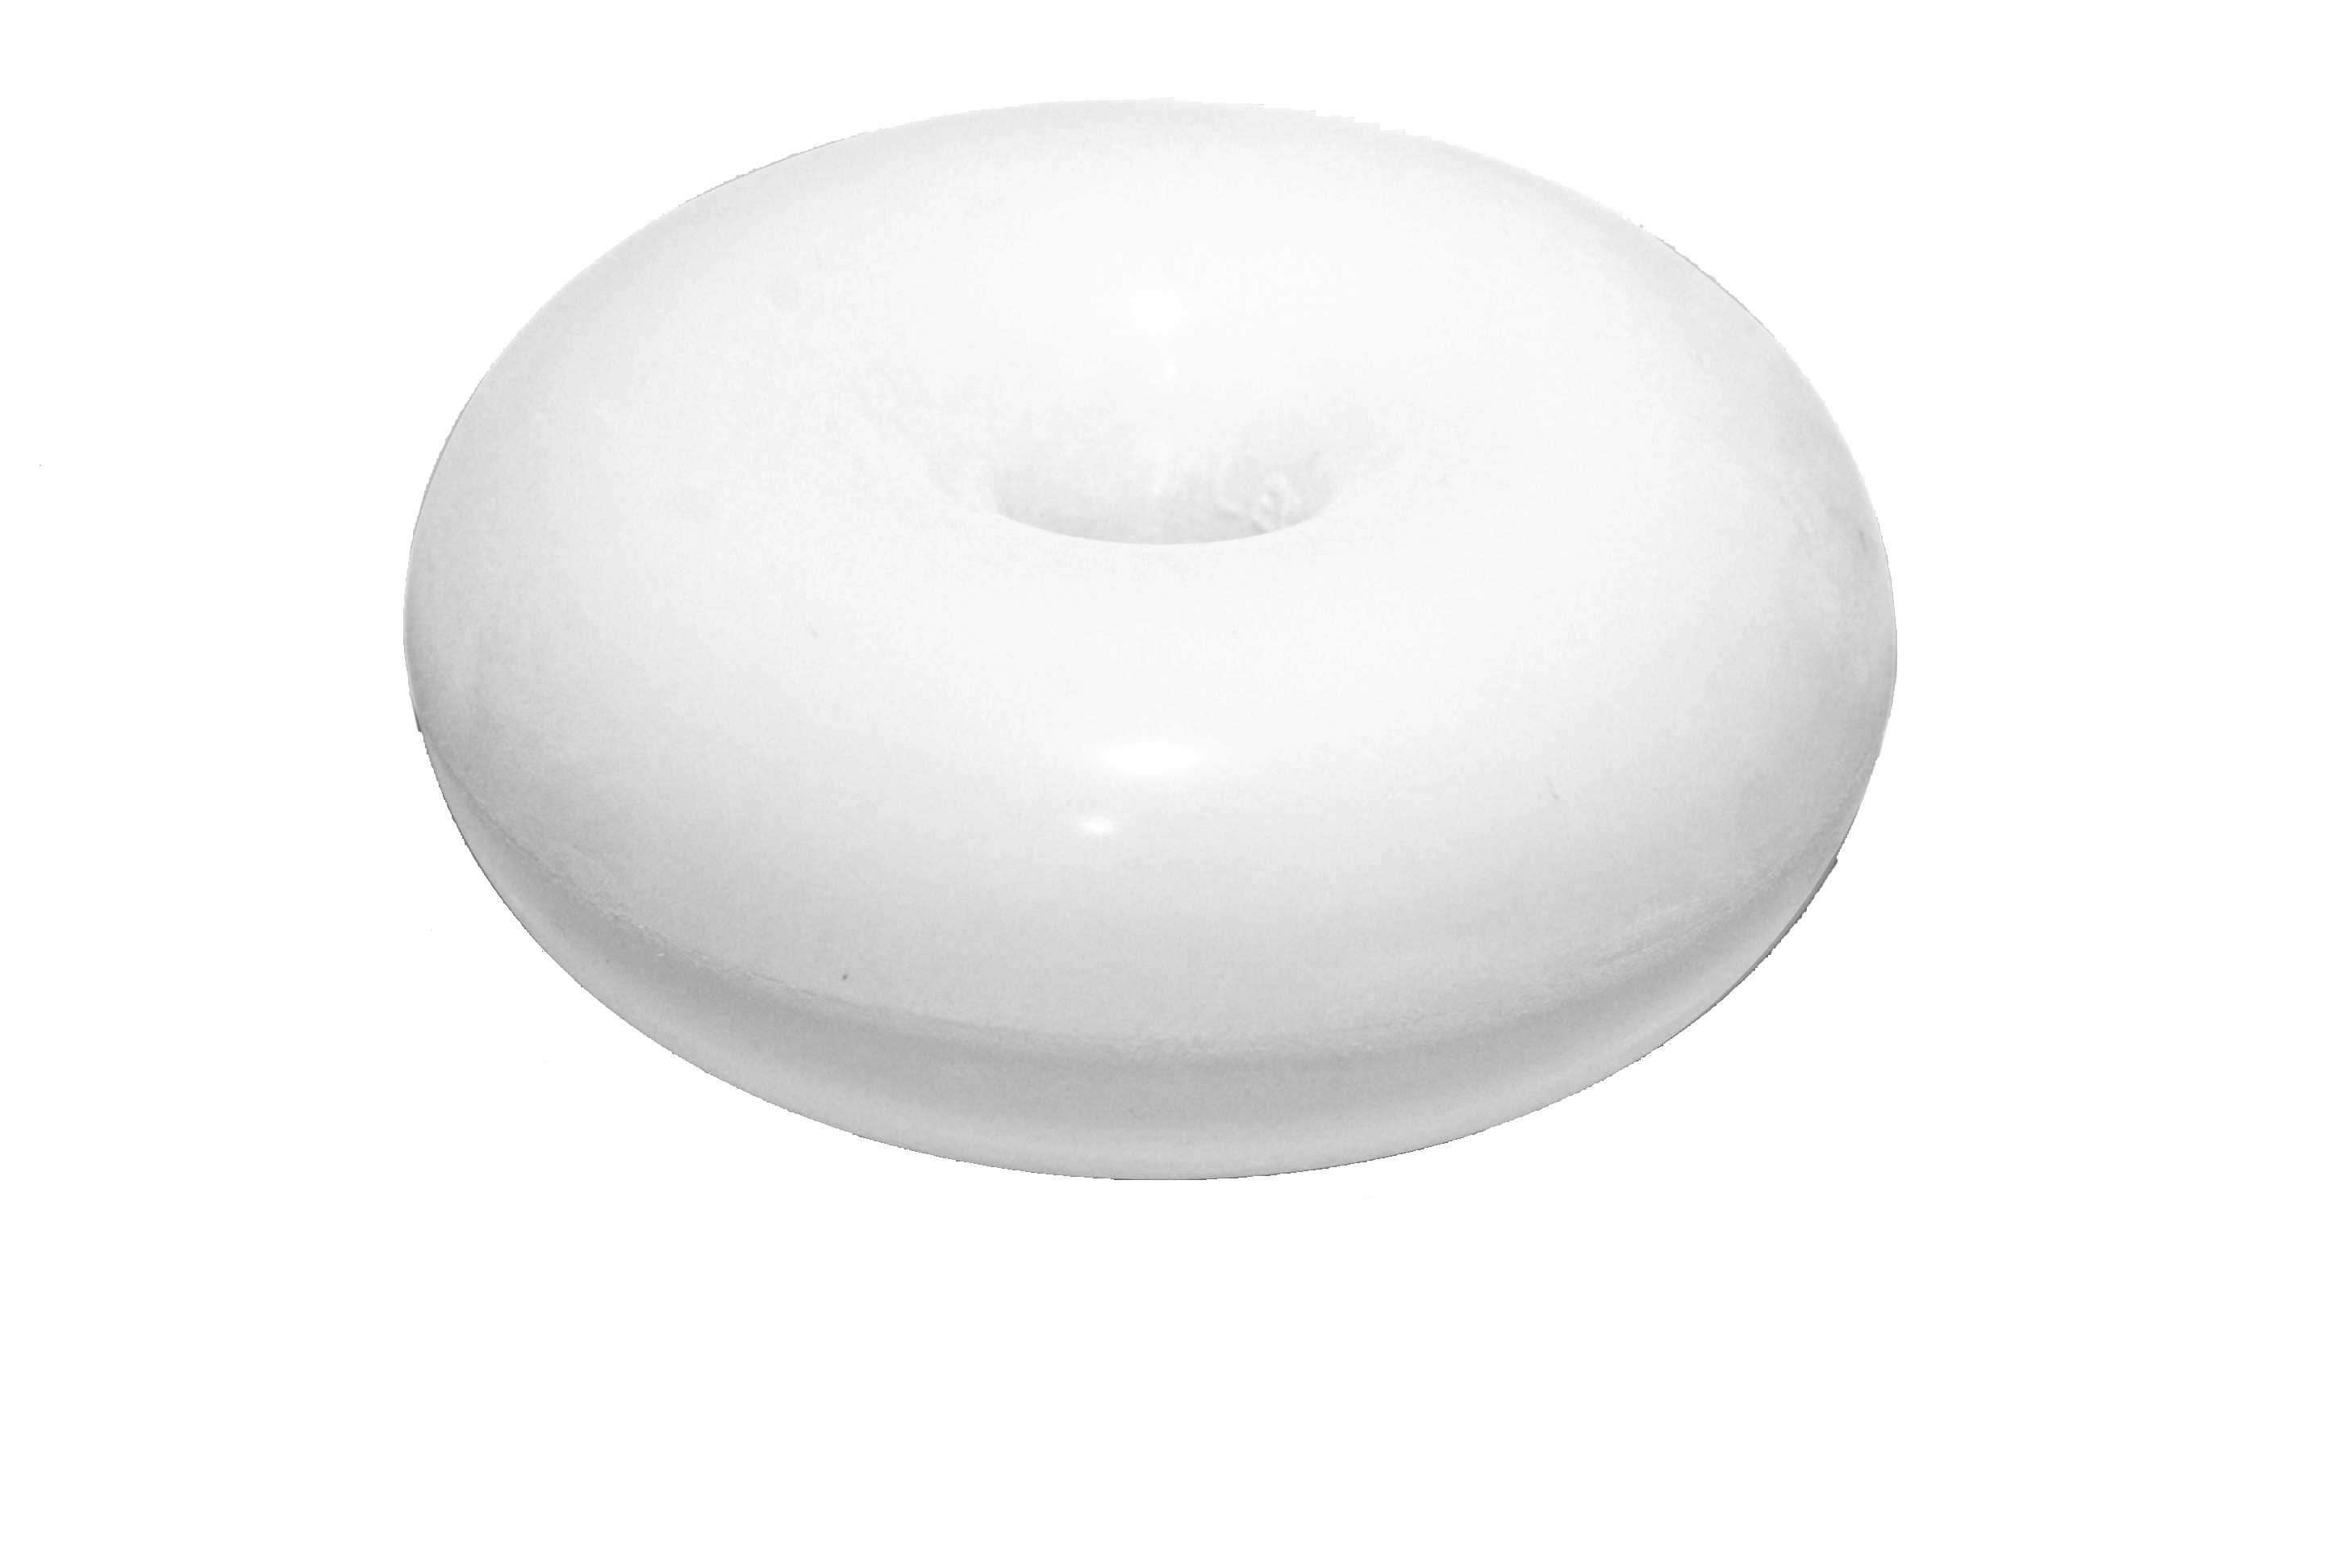 MedGyn Pessary Silicone Donut #6 3.5 inches or 88 mm